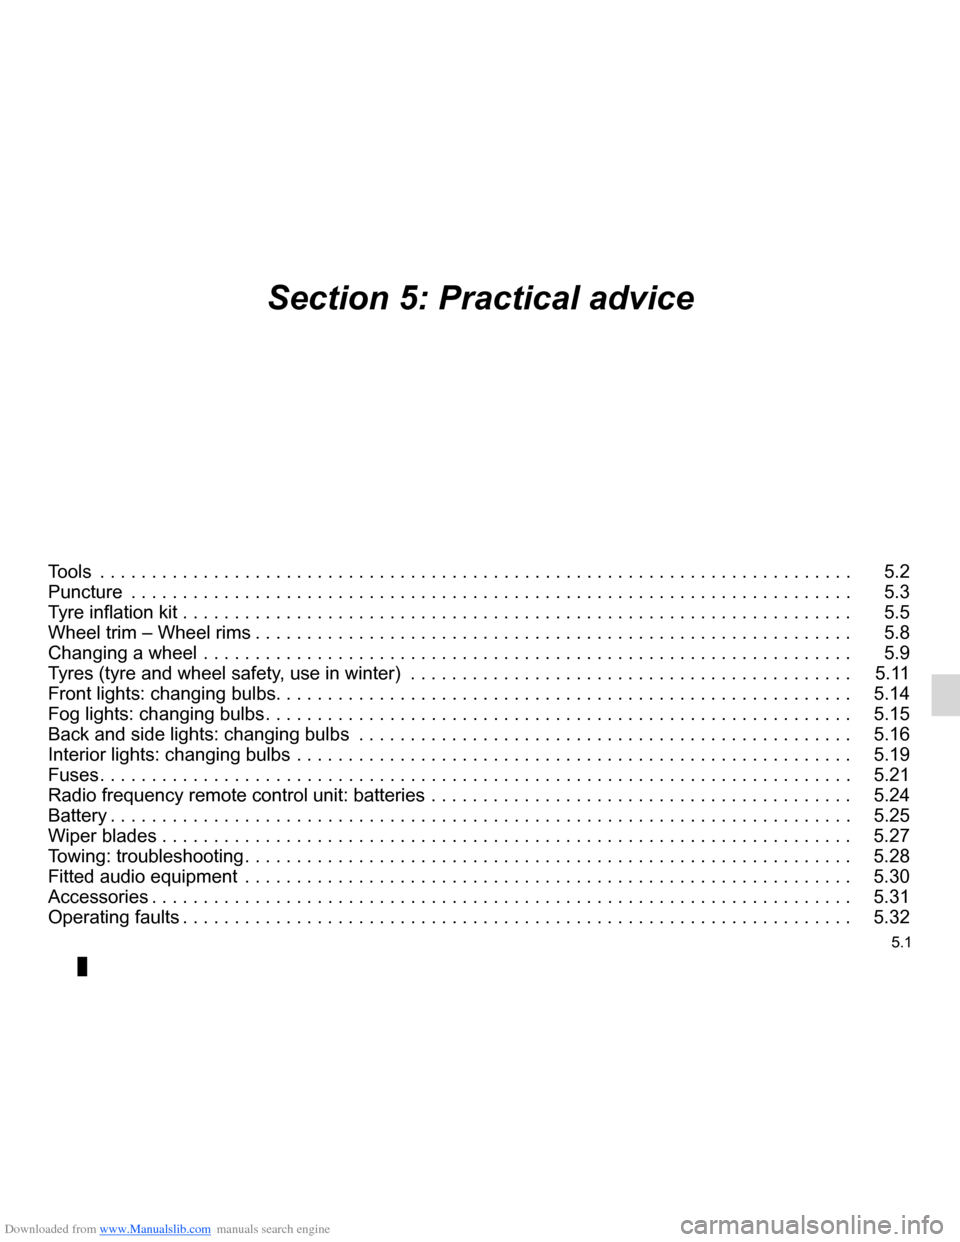 DACIA LODGY 2012 1.G Owners Manual Downloaded from www.Manualslib.com manuals search engine 5.1
ENG_UD28067_3
Sommaire 5 (X92 - Renault)
ENG_NU_975-3_X92_Dacia_5
Section 5: Practical advice
Tools  . . . . . . . . . . . . . . . . . . . 